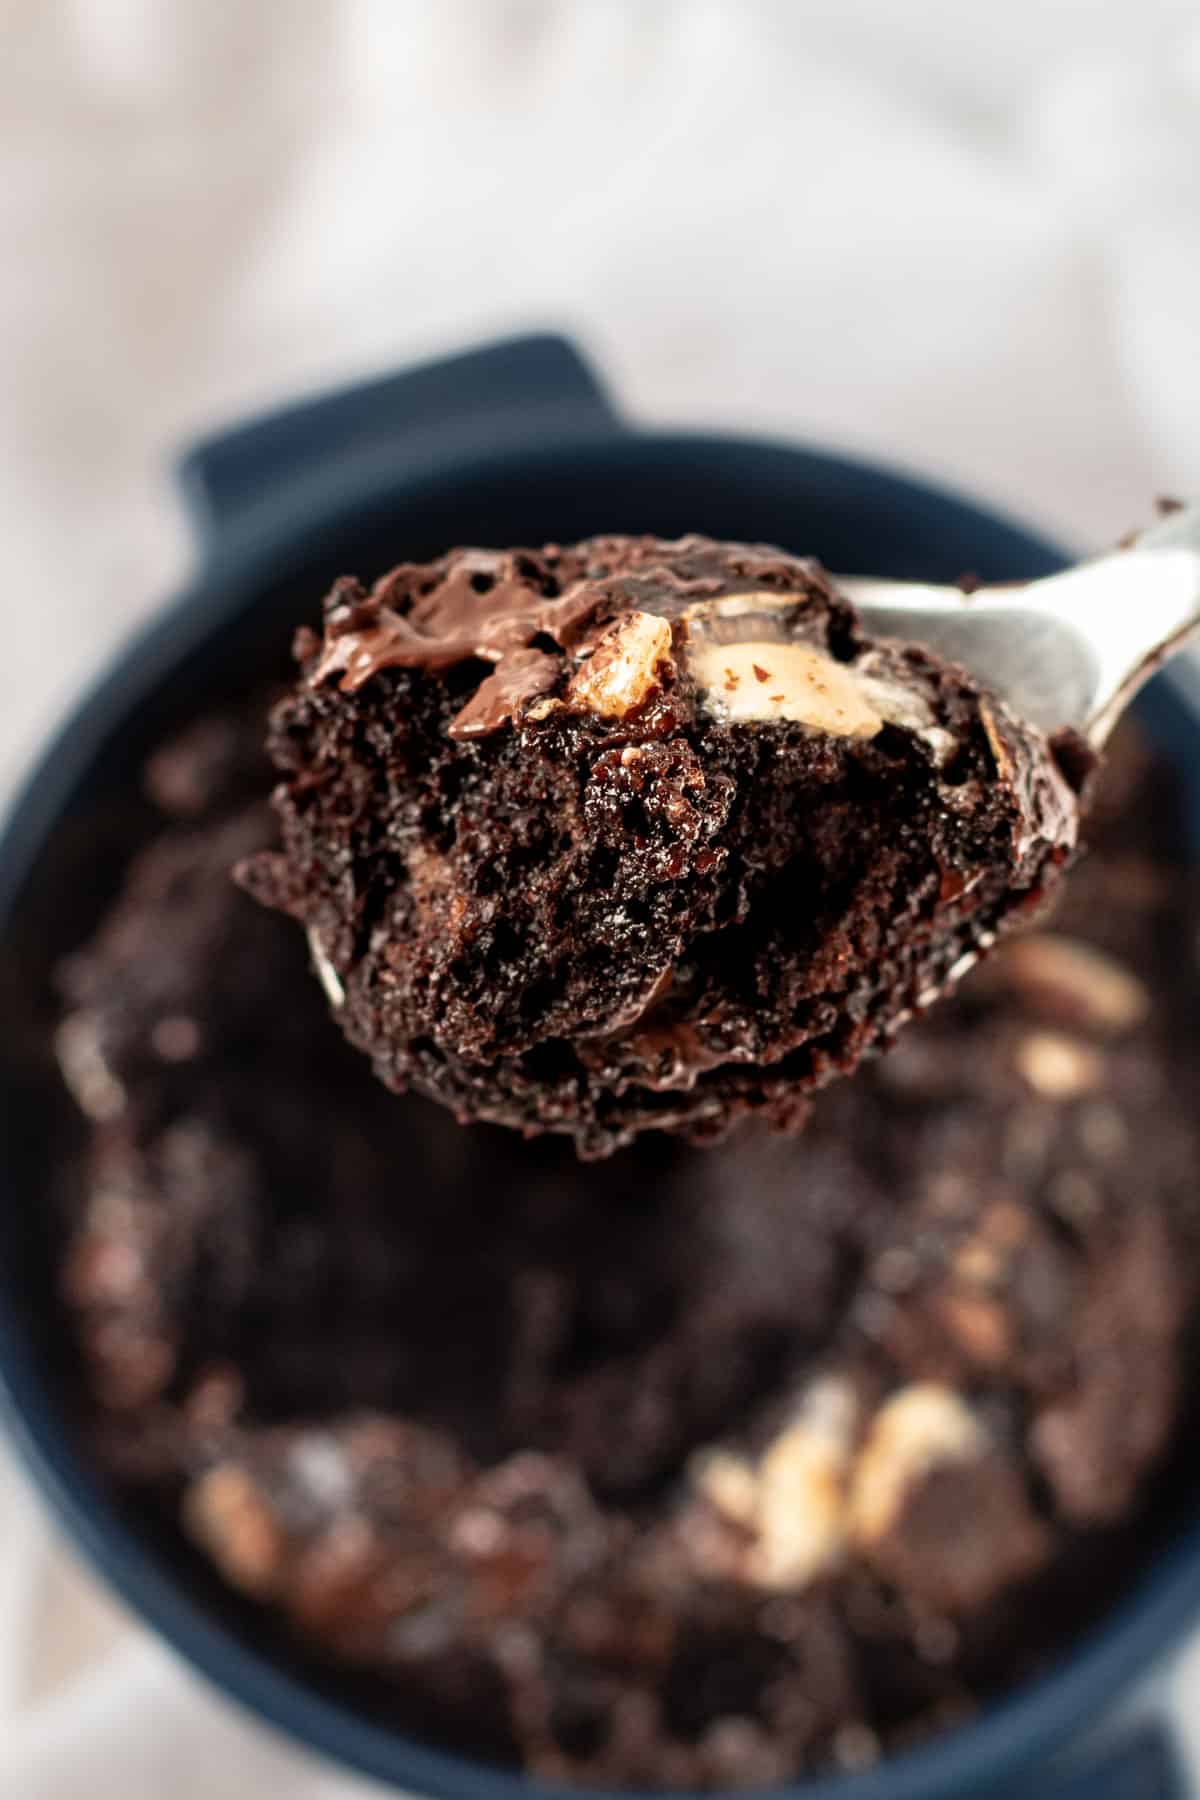 A spoonful of chocolate baked oats.